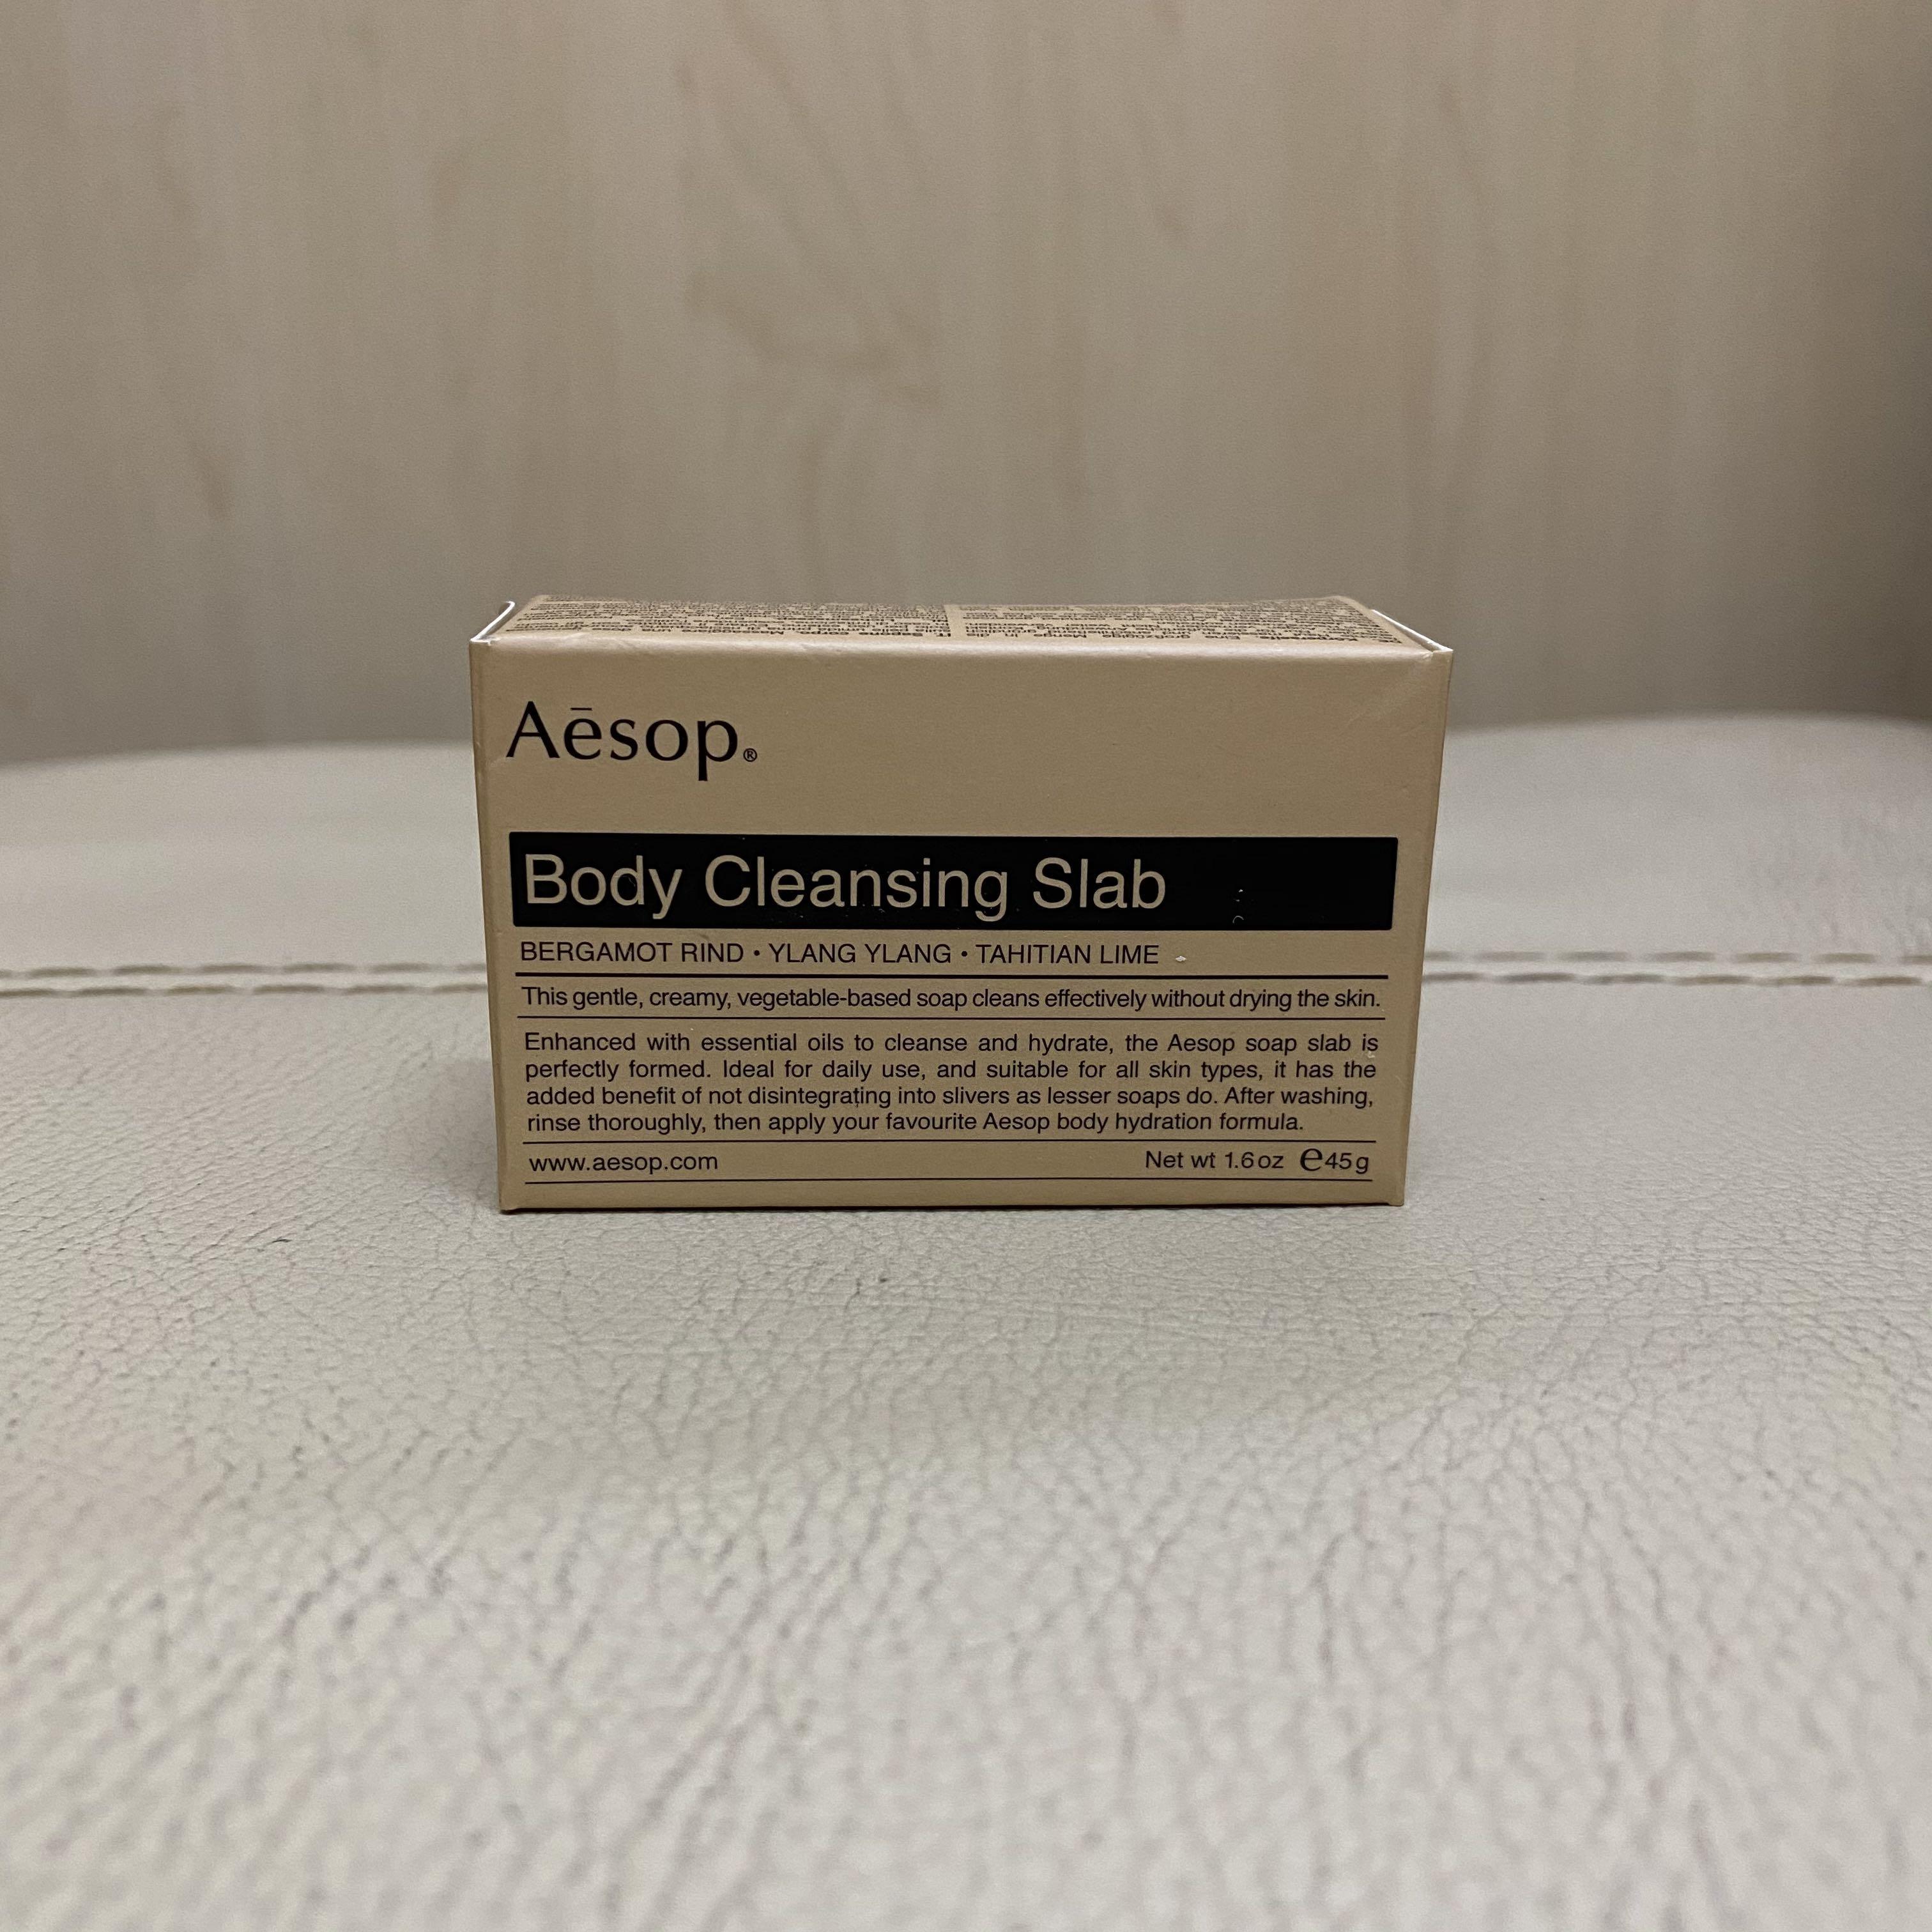 ORIGINAL] Aesop Body Cleansing Slab 45g, Beauty & Personal Care